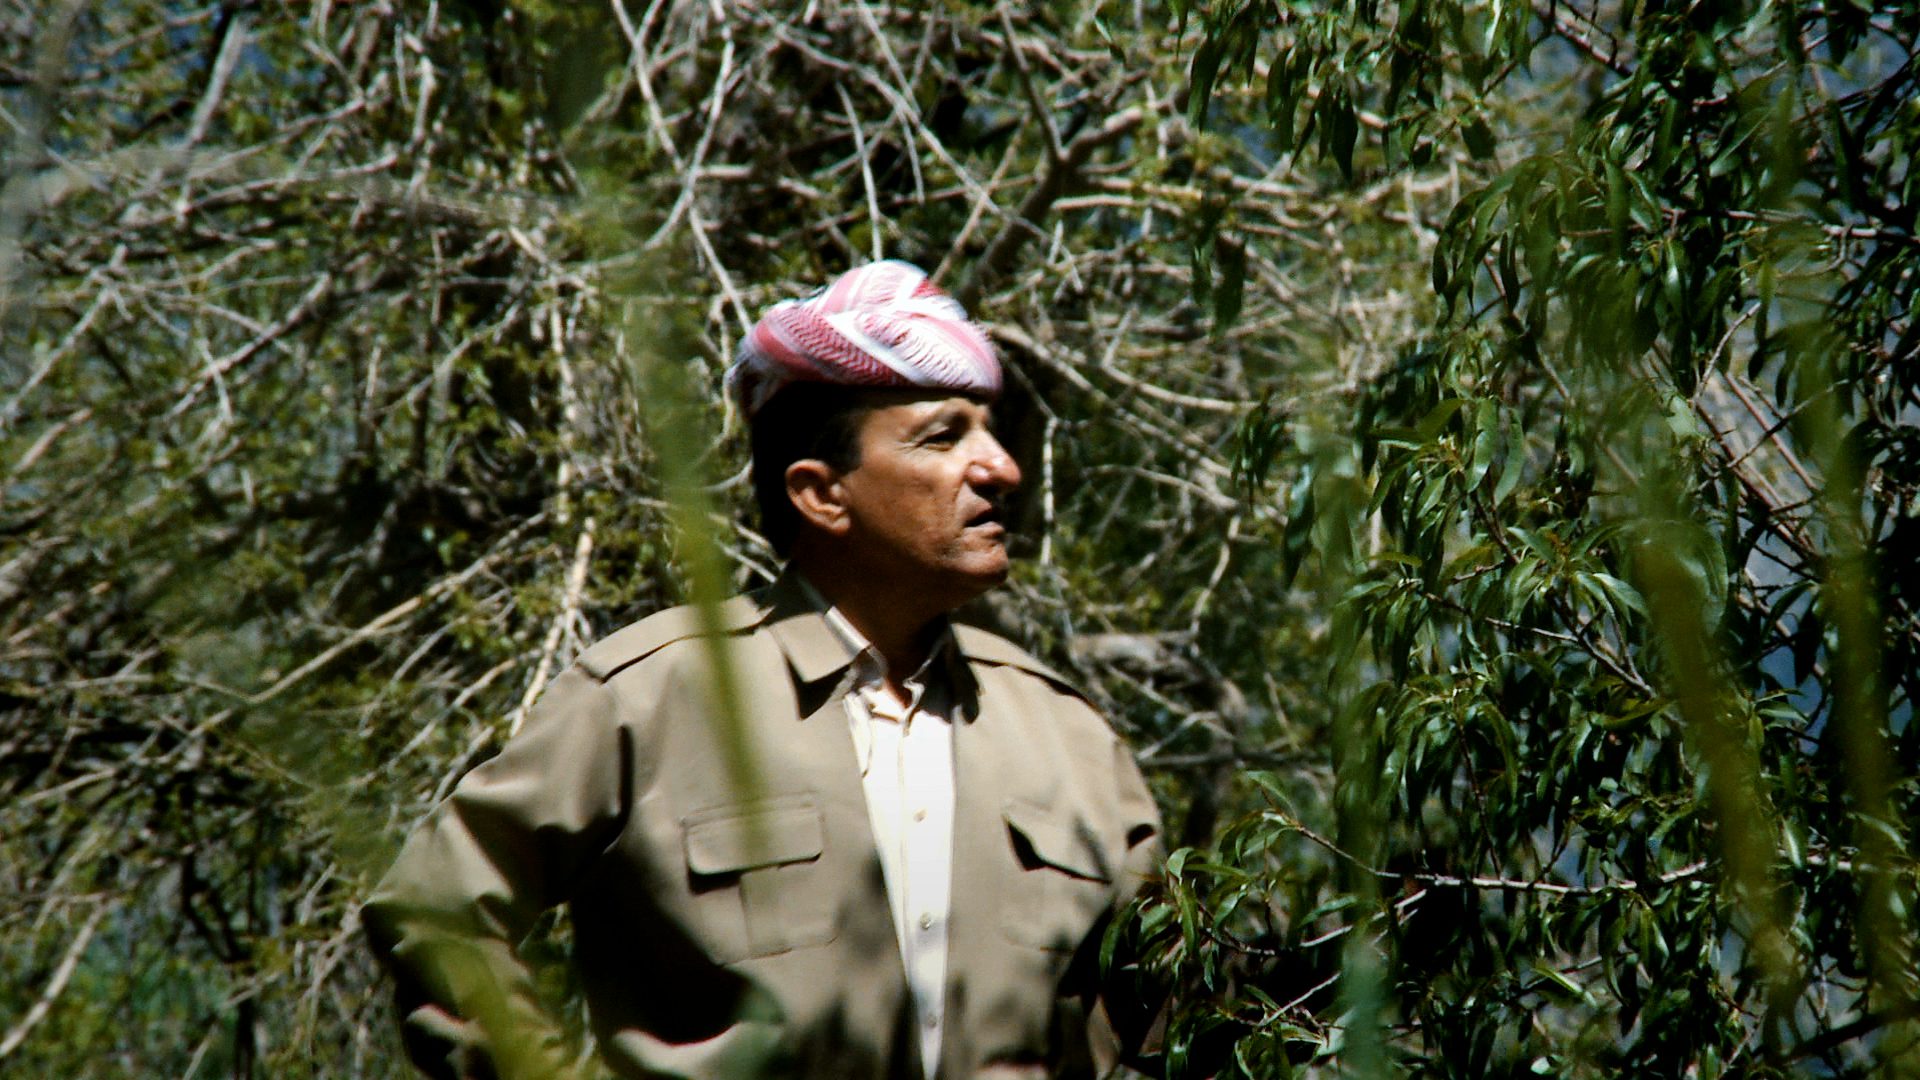 Kurdistan Democratic Party (KDP) commander AMIN HUSSEIN AHMED and his peshmerga were forced to flee to the Gara mountains after an Iraqi attack on Gaverki village in 1988. Their women and children were allowed to surrender but they escaped. When Amin Hussein later returned to the village to scavenge supplies, he saw Iraqi soldiers destroying their homes. 1/1.